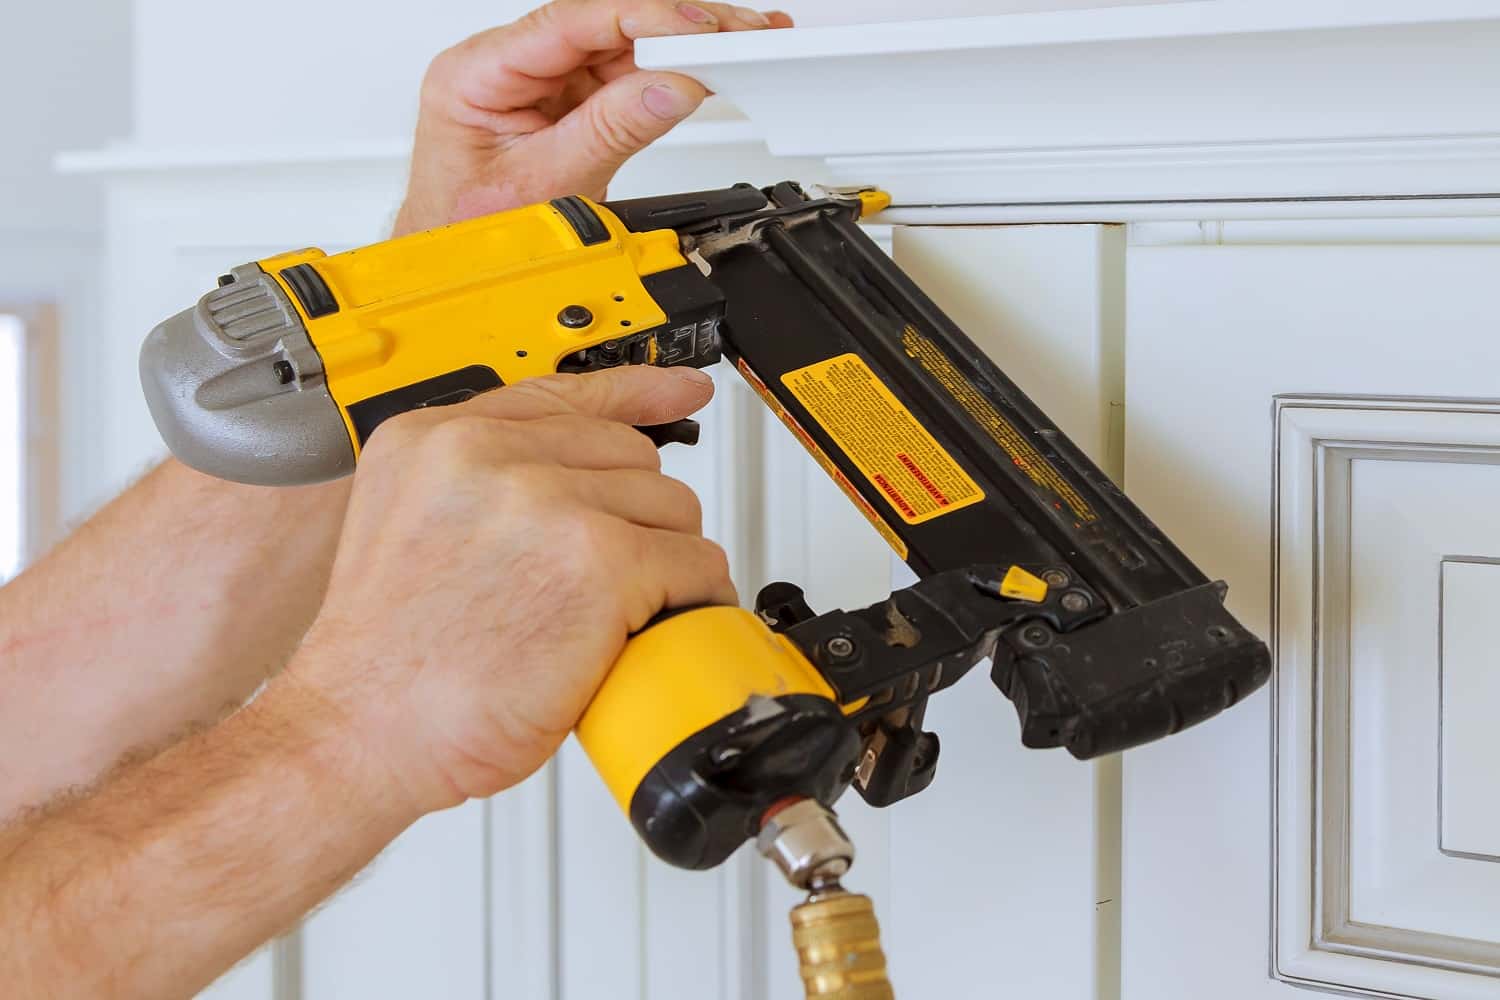 Carpenter brad using nail gun to Crown Moulding on kitchen cabinets framing trim, with the warning label that all power tools have on them shown illustrating safety concept